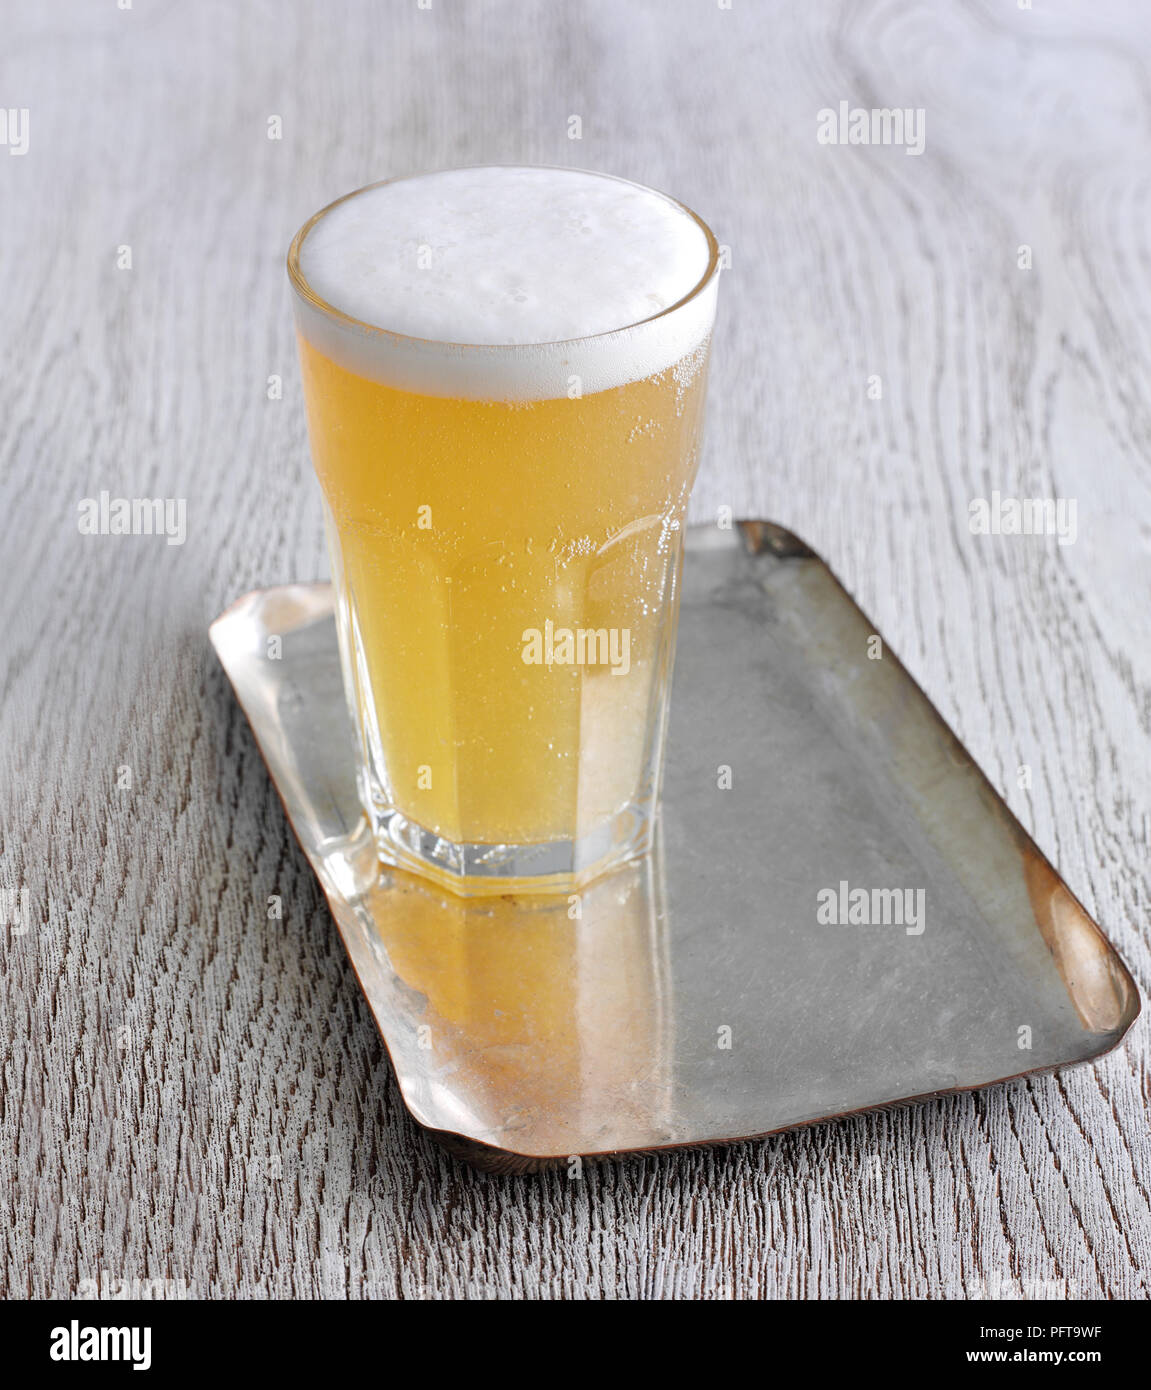 Glass of wheat beer on tray Stock Photo